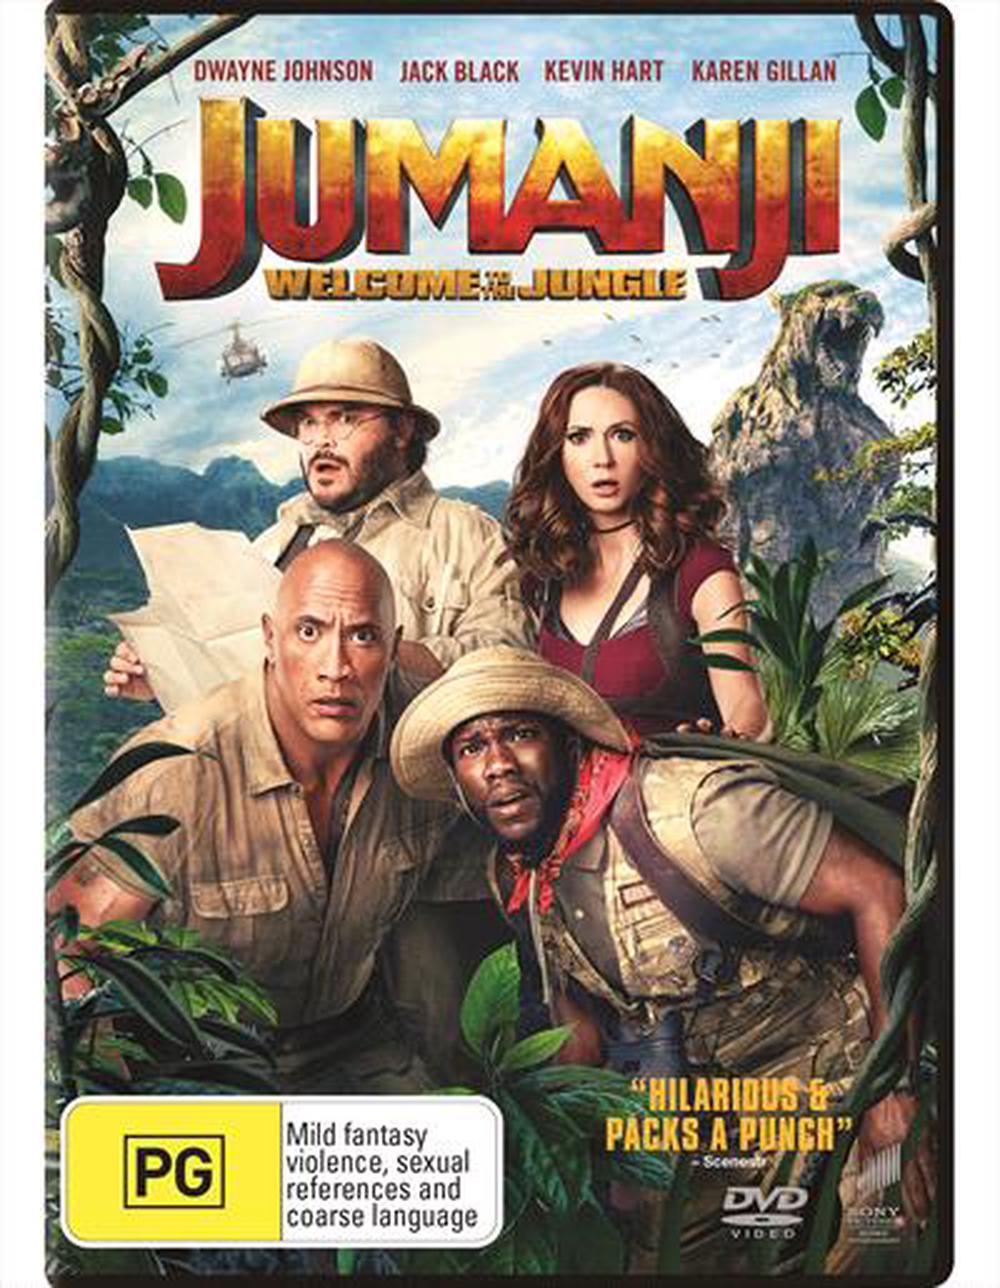 Jumanji - Welcome To The Jungle, DVD | Buy online at The Nile